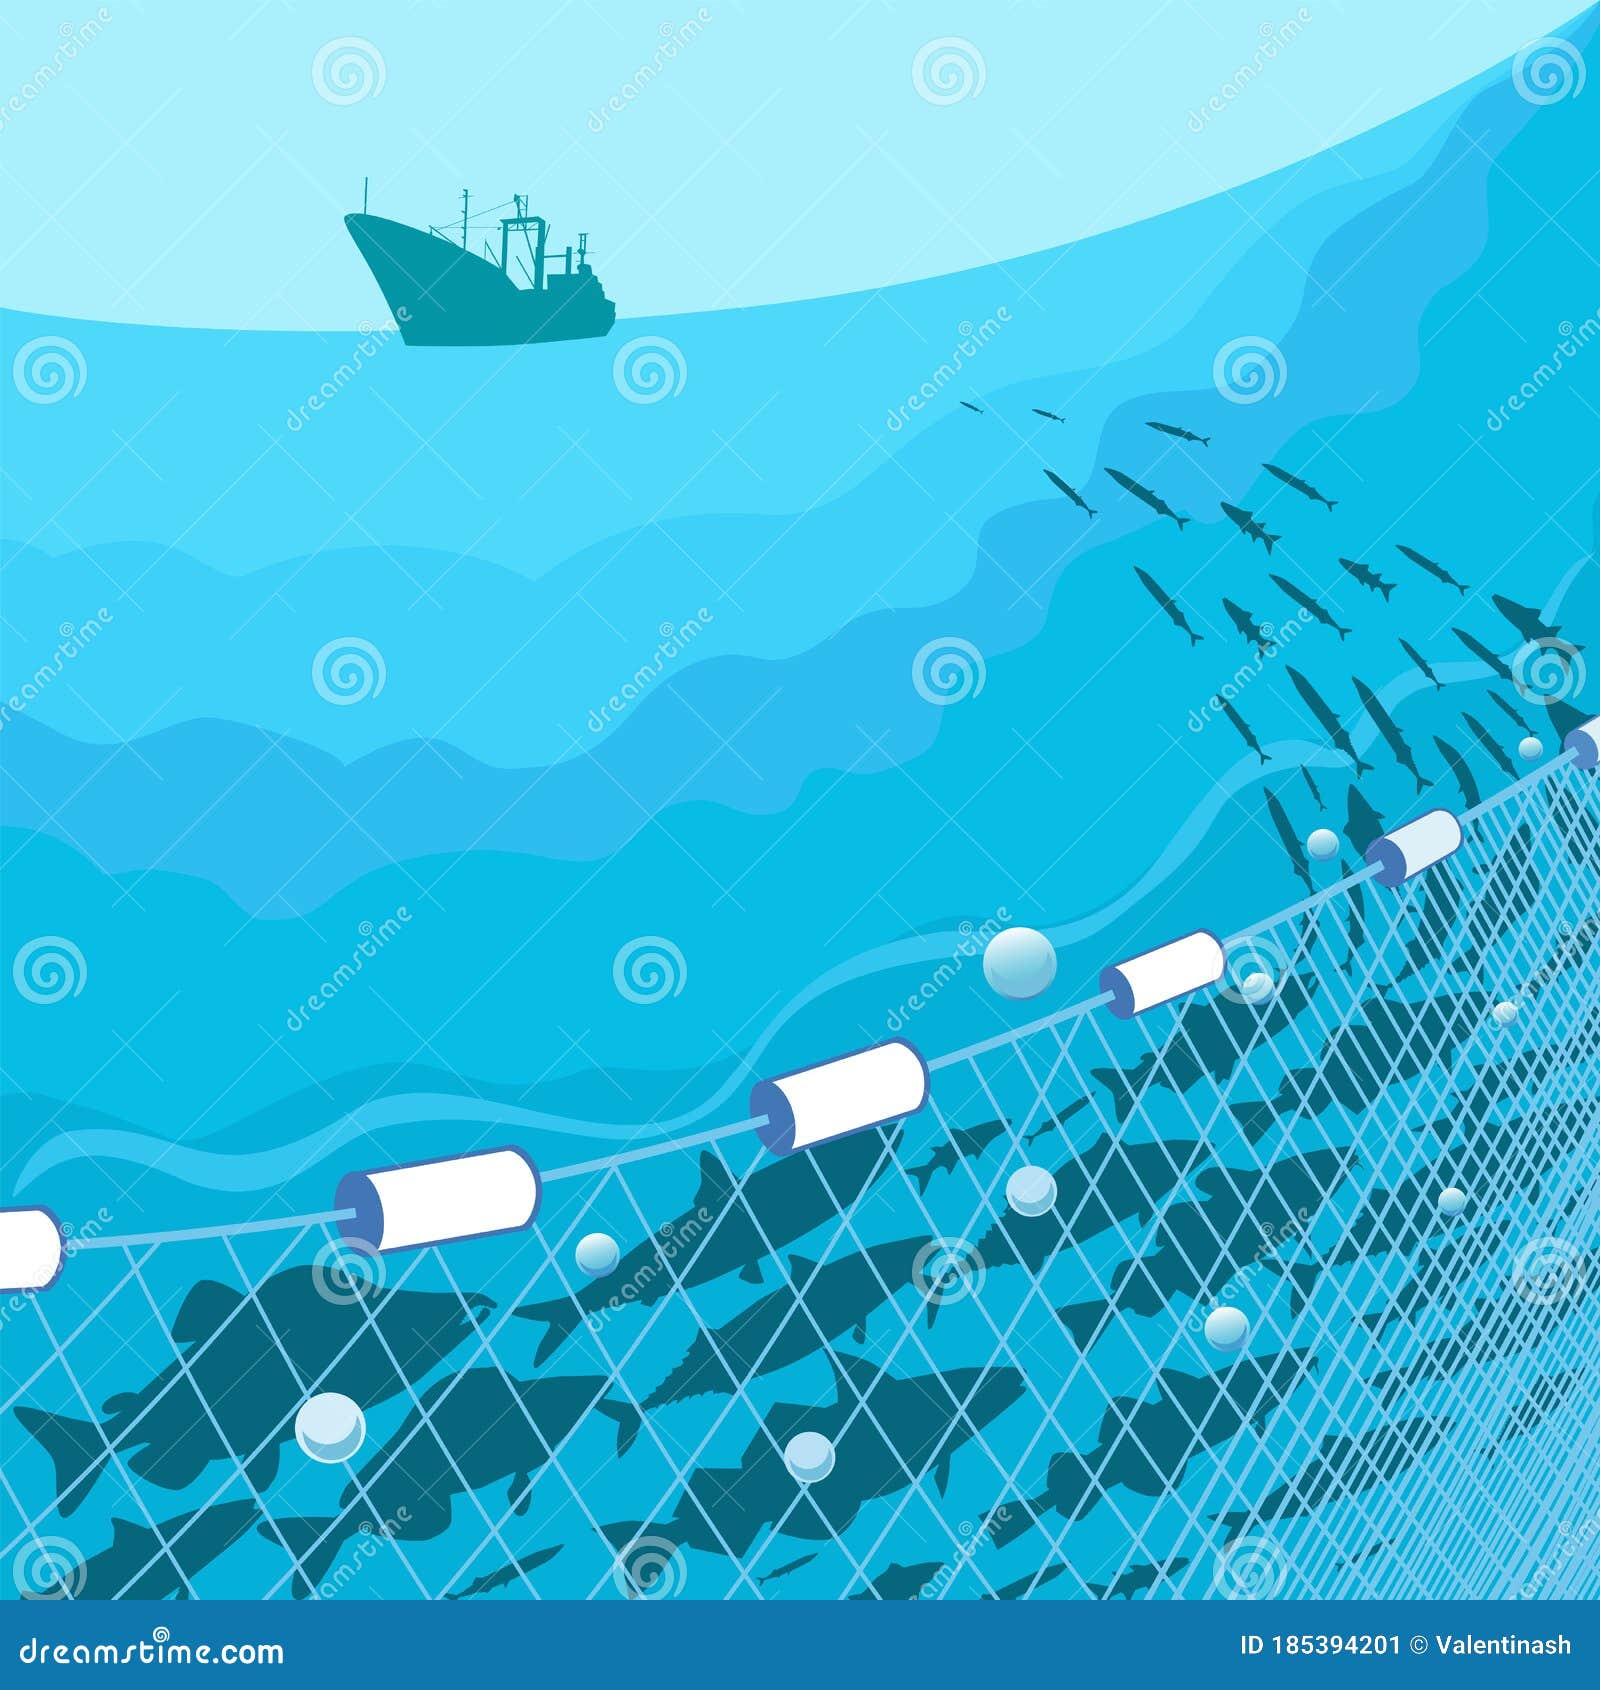 Commercial Fish, Fishing Nets and Fishing Vessel Stock Vector